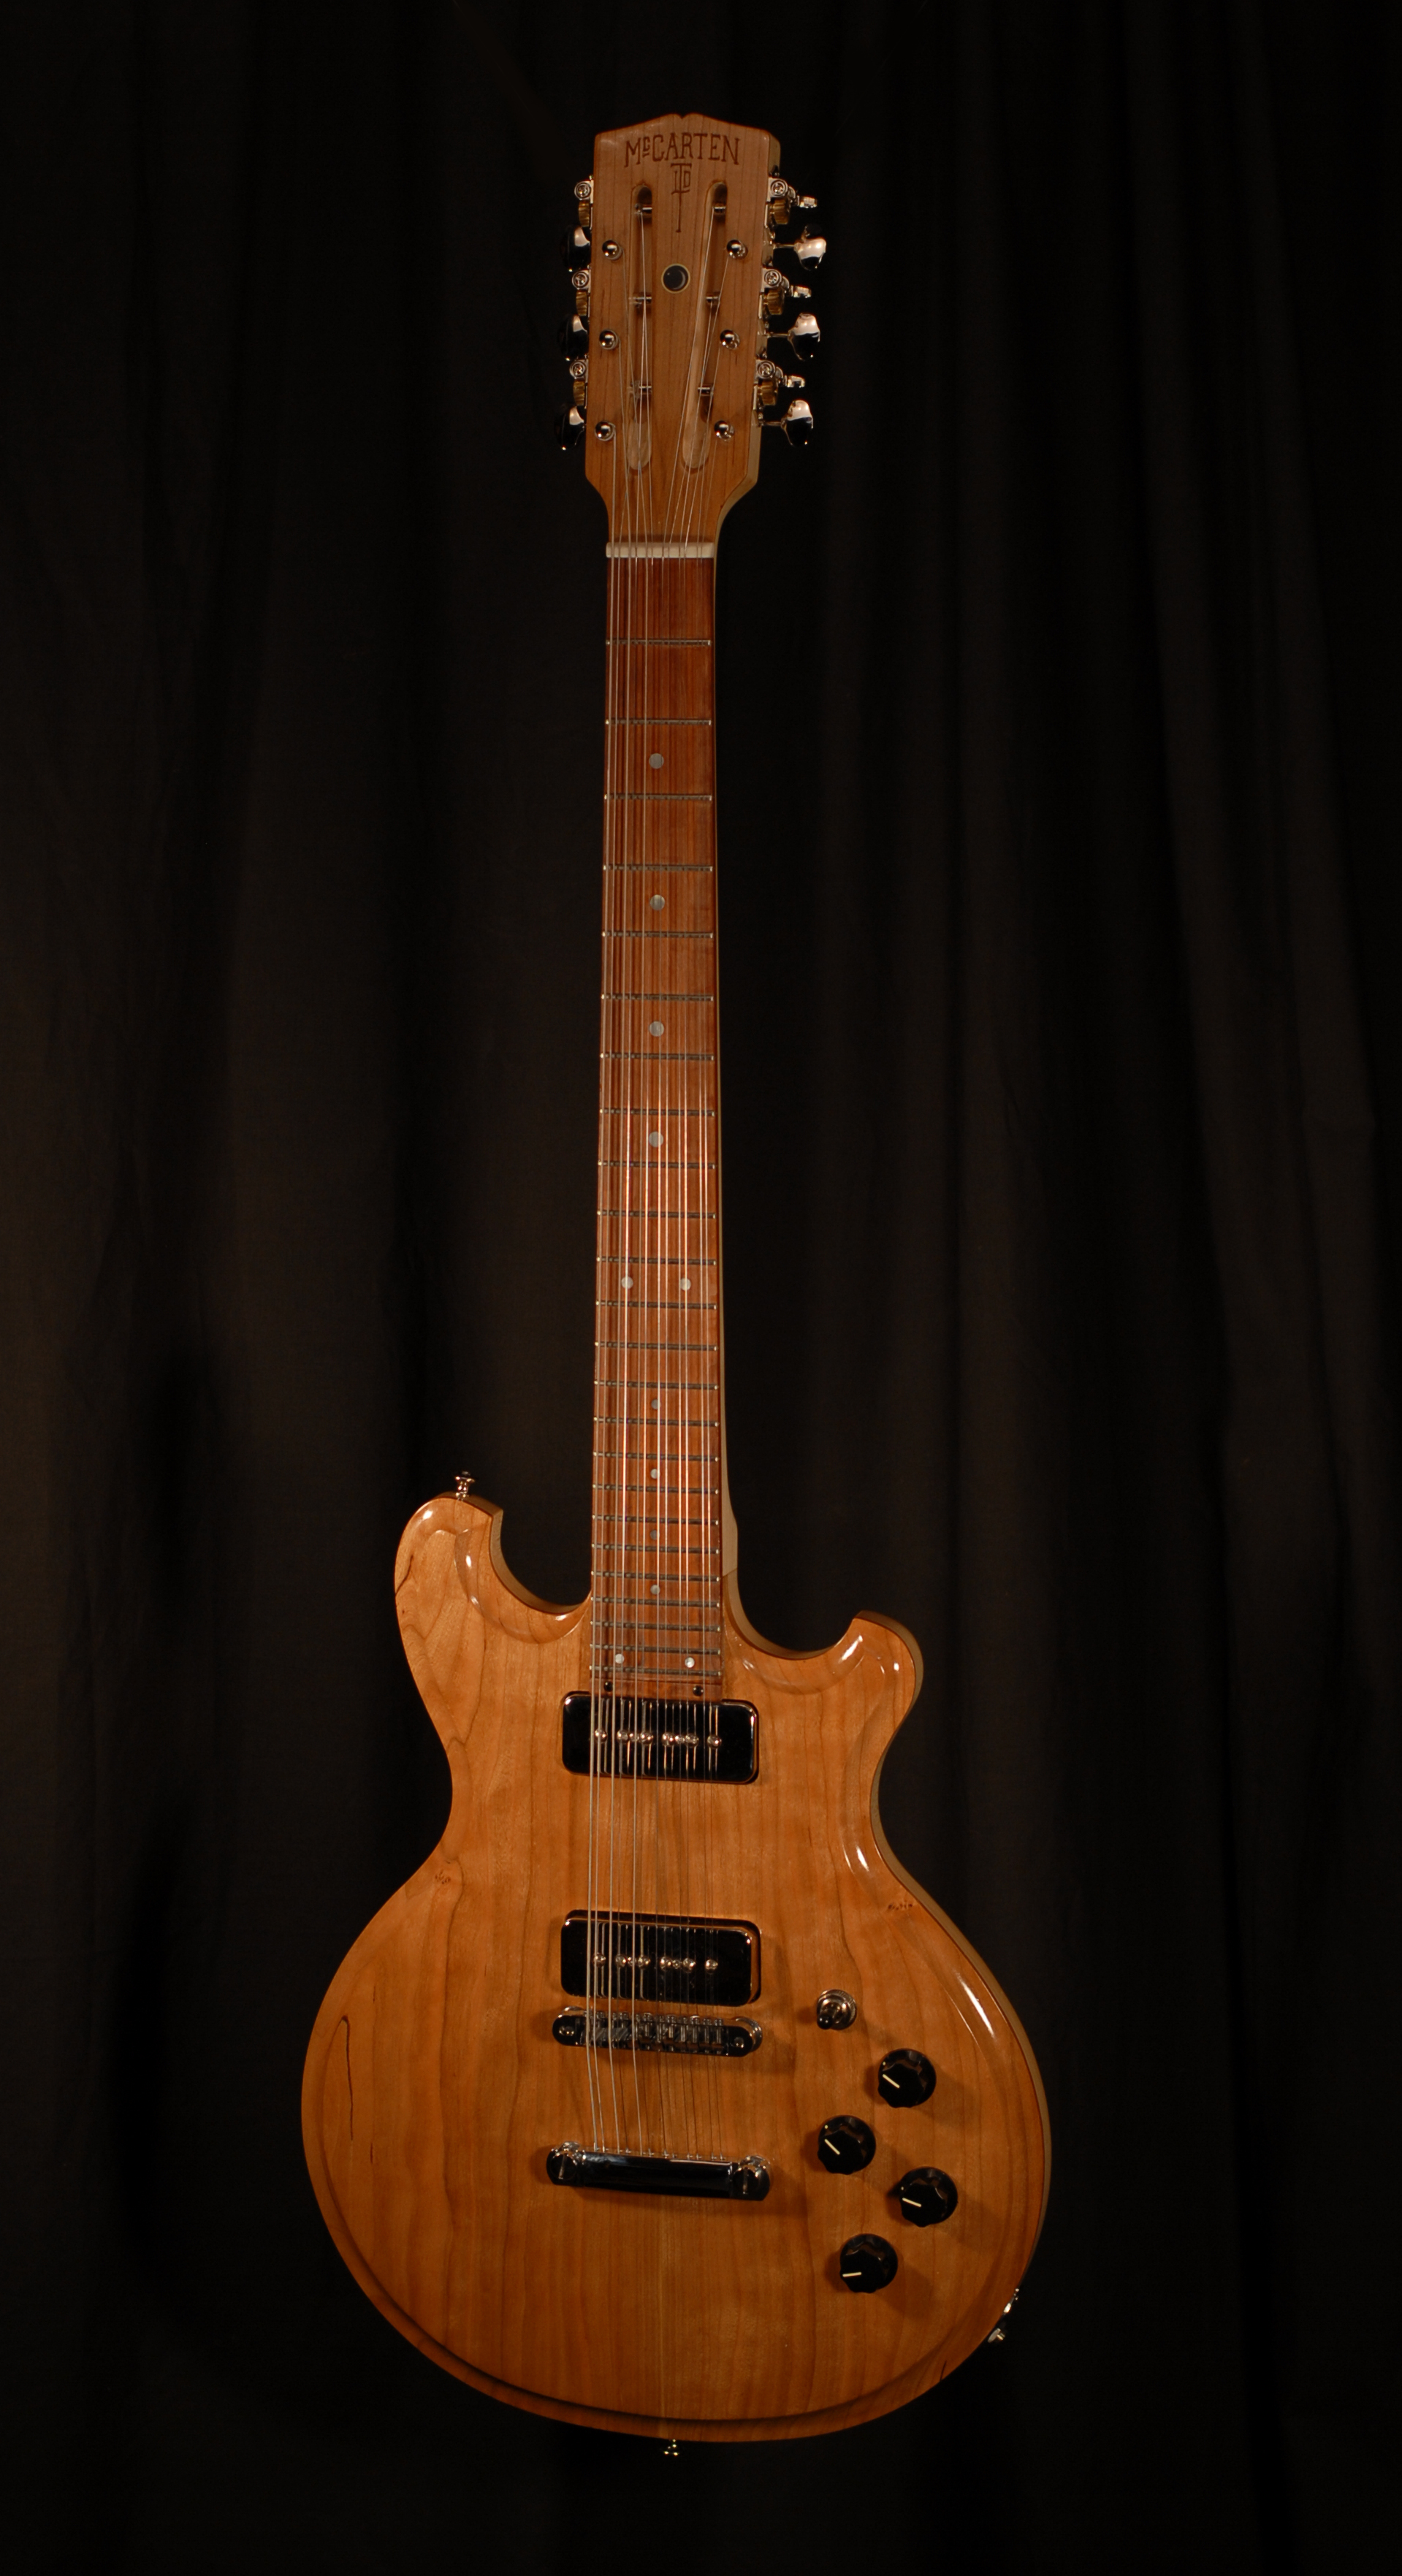 front view of michael mccarten's double cutaway electric 12 string guitar model